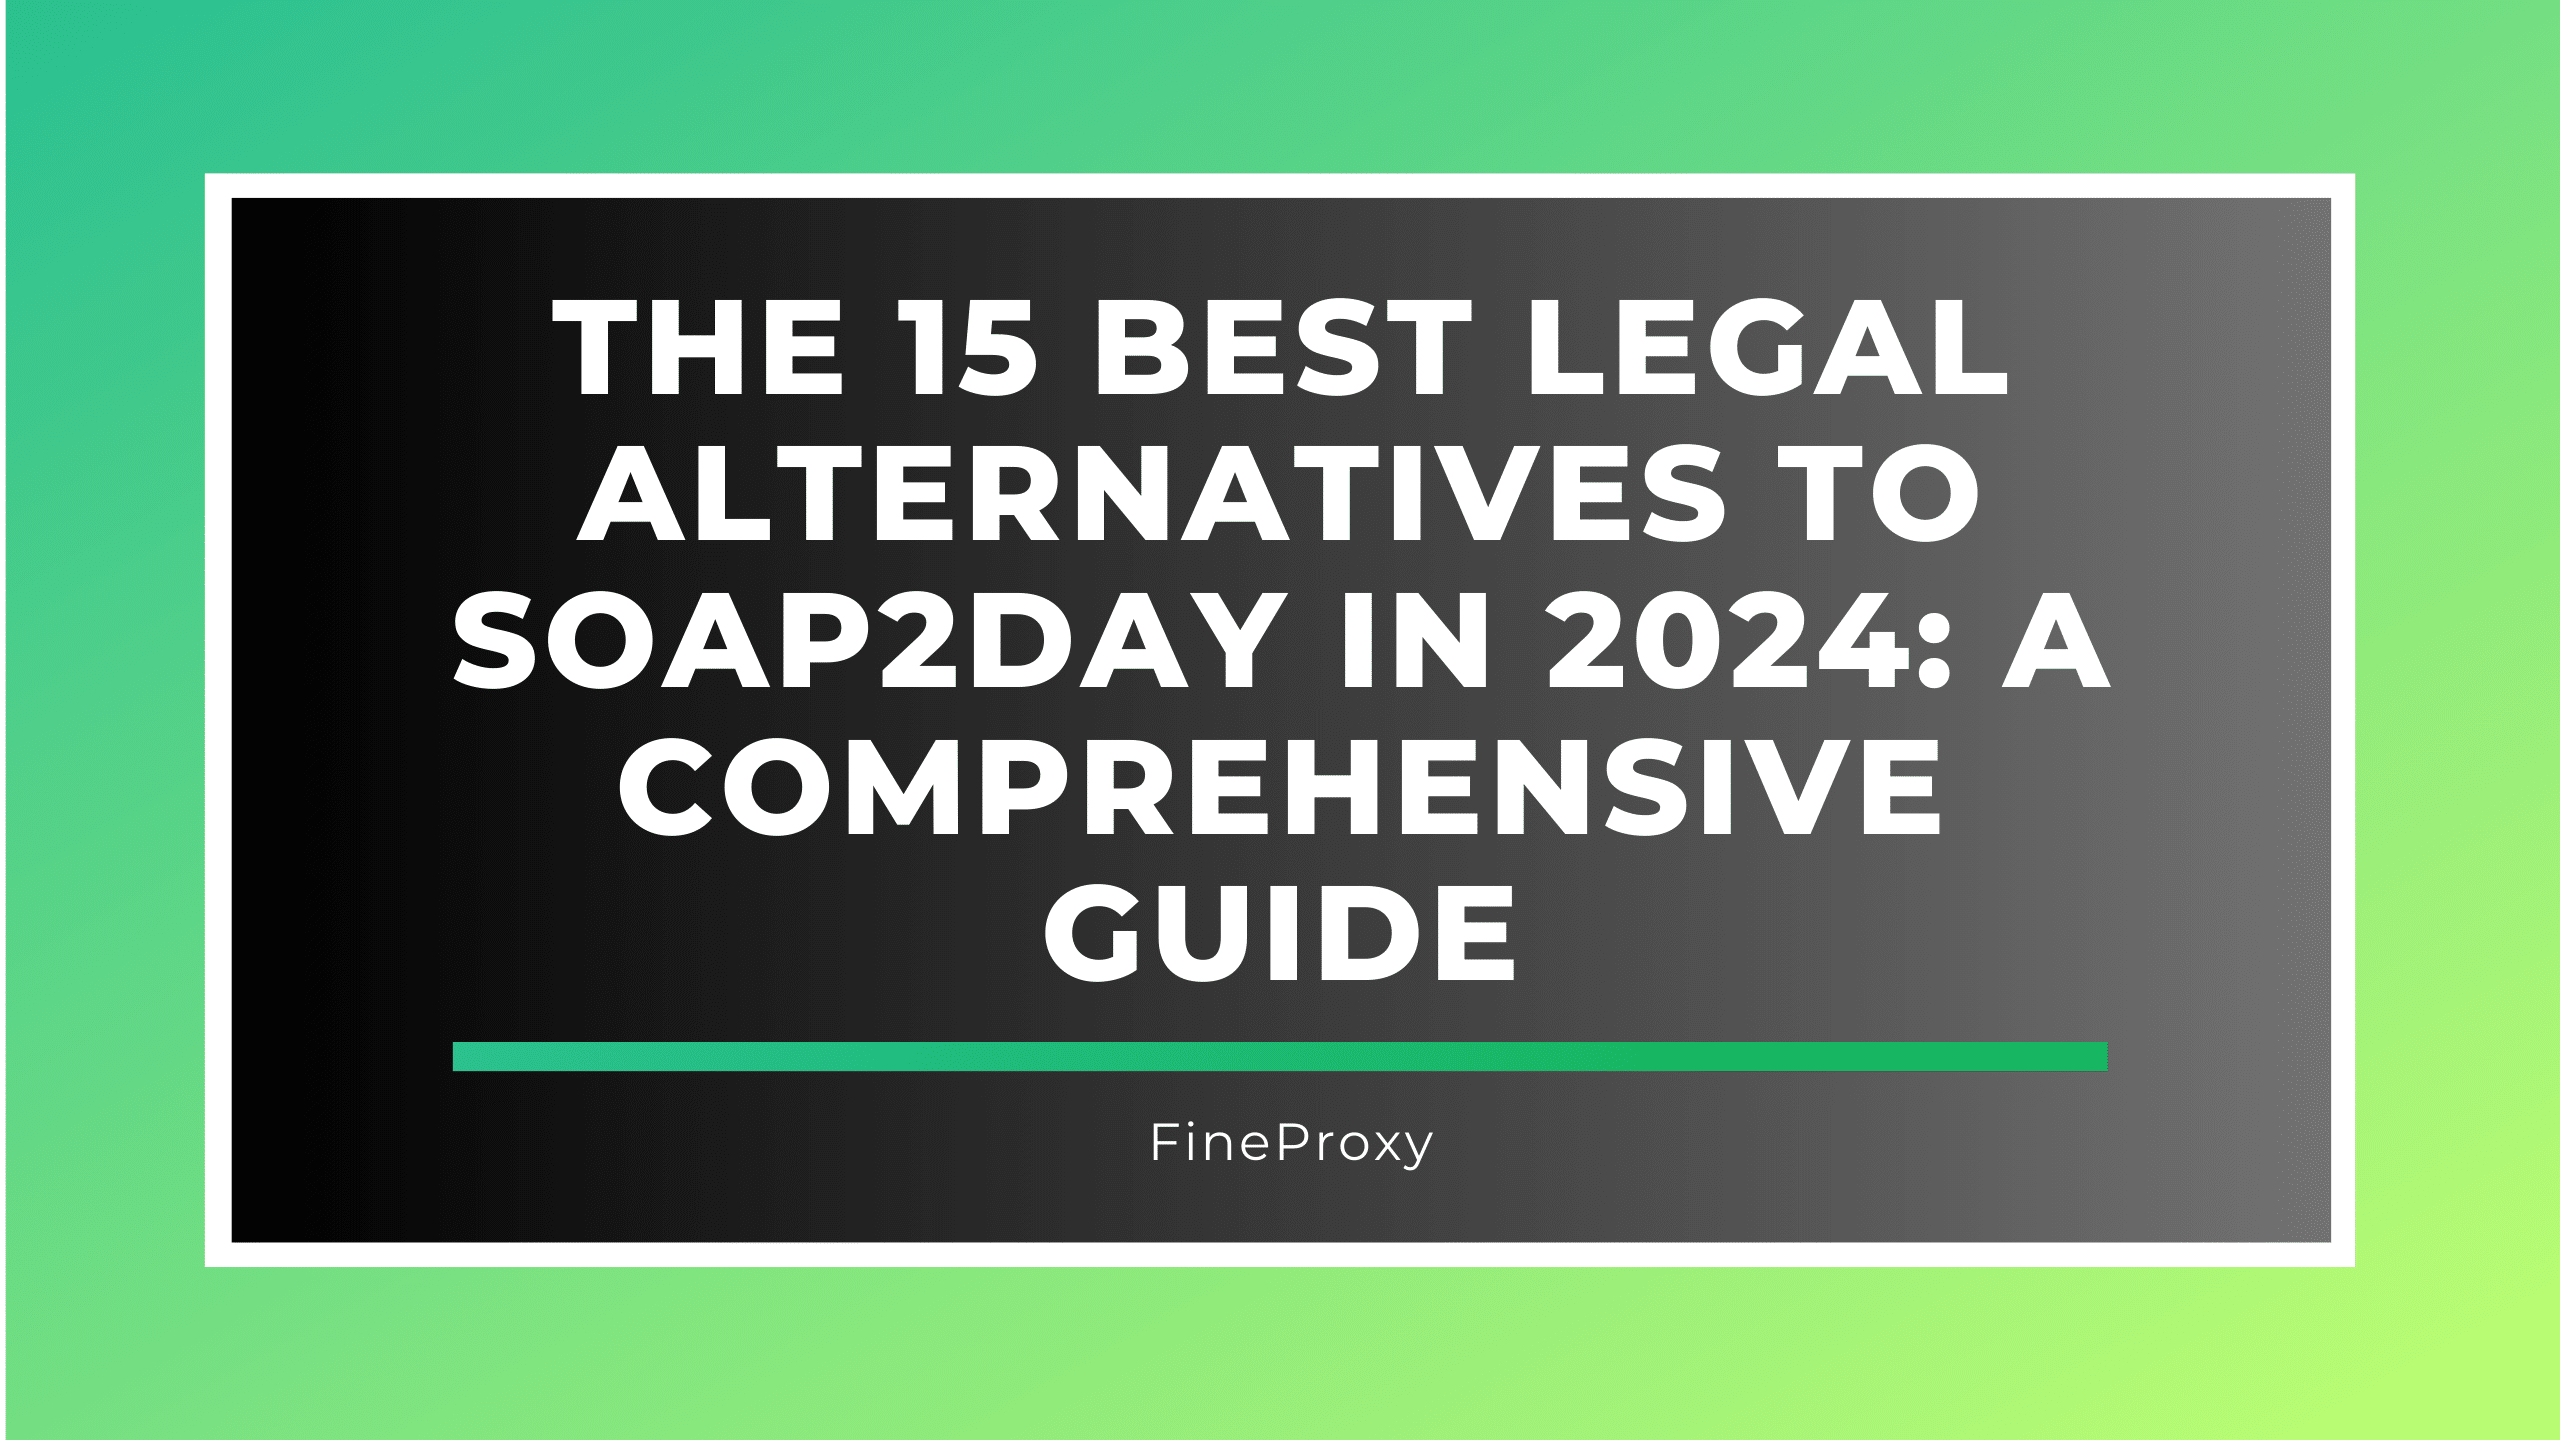 The 15 Best Legal Alternatives to Soap2day in 2024: A Comprehensive Guide